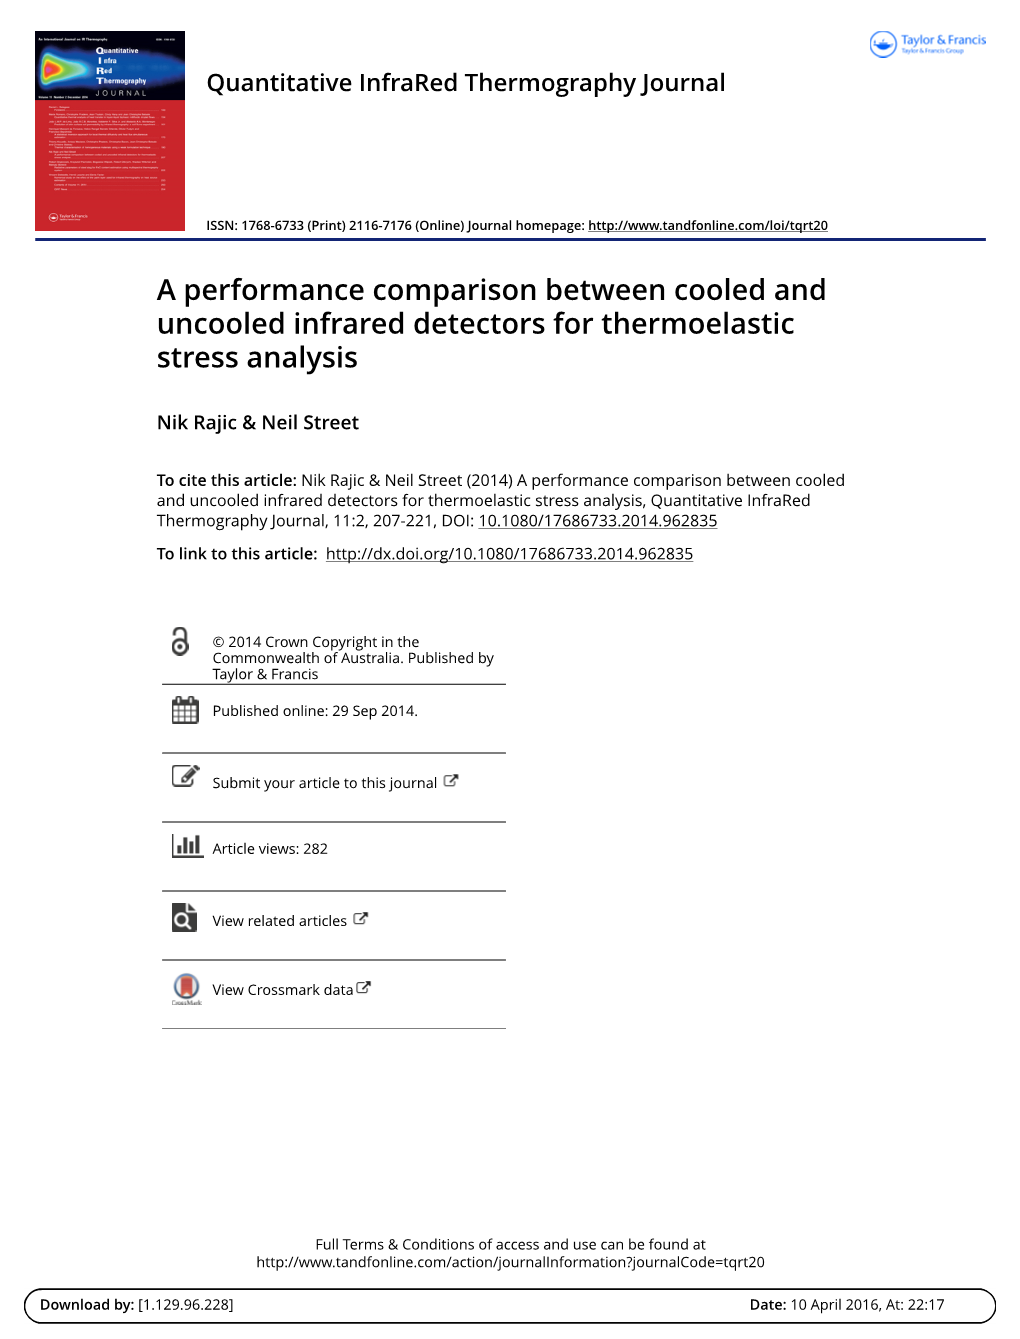 A Performance Comparison Between Cooled and Uncooled Infrared Detectors for Thermoelastic Stress Analysis